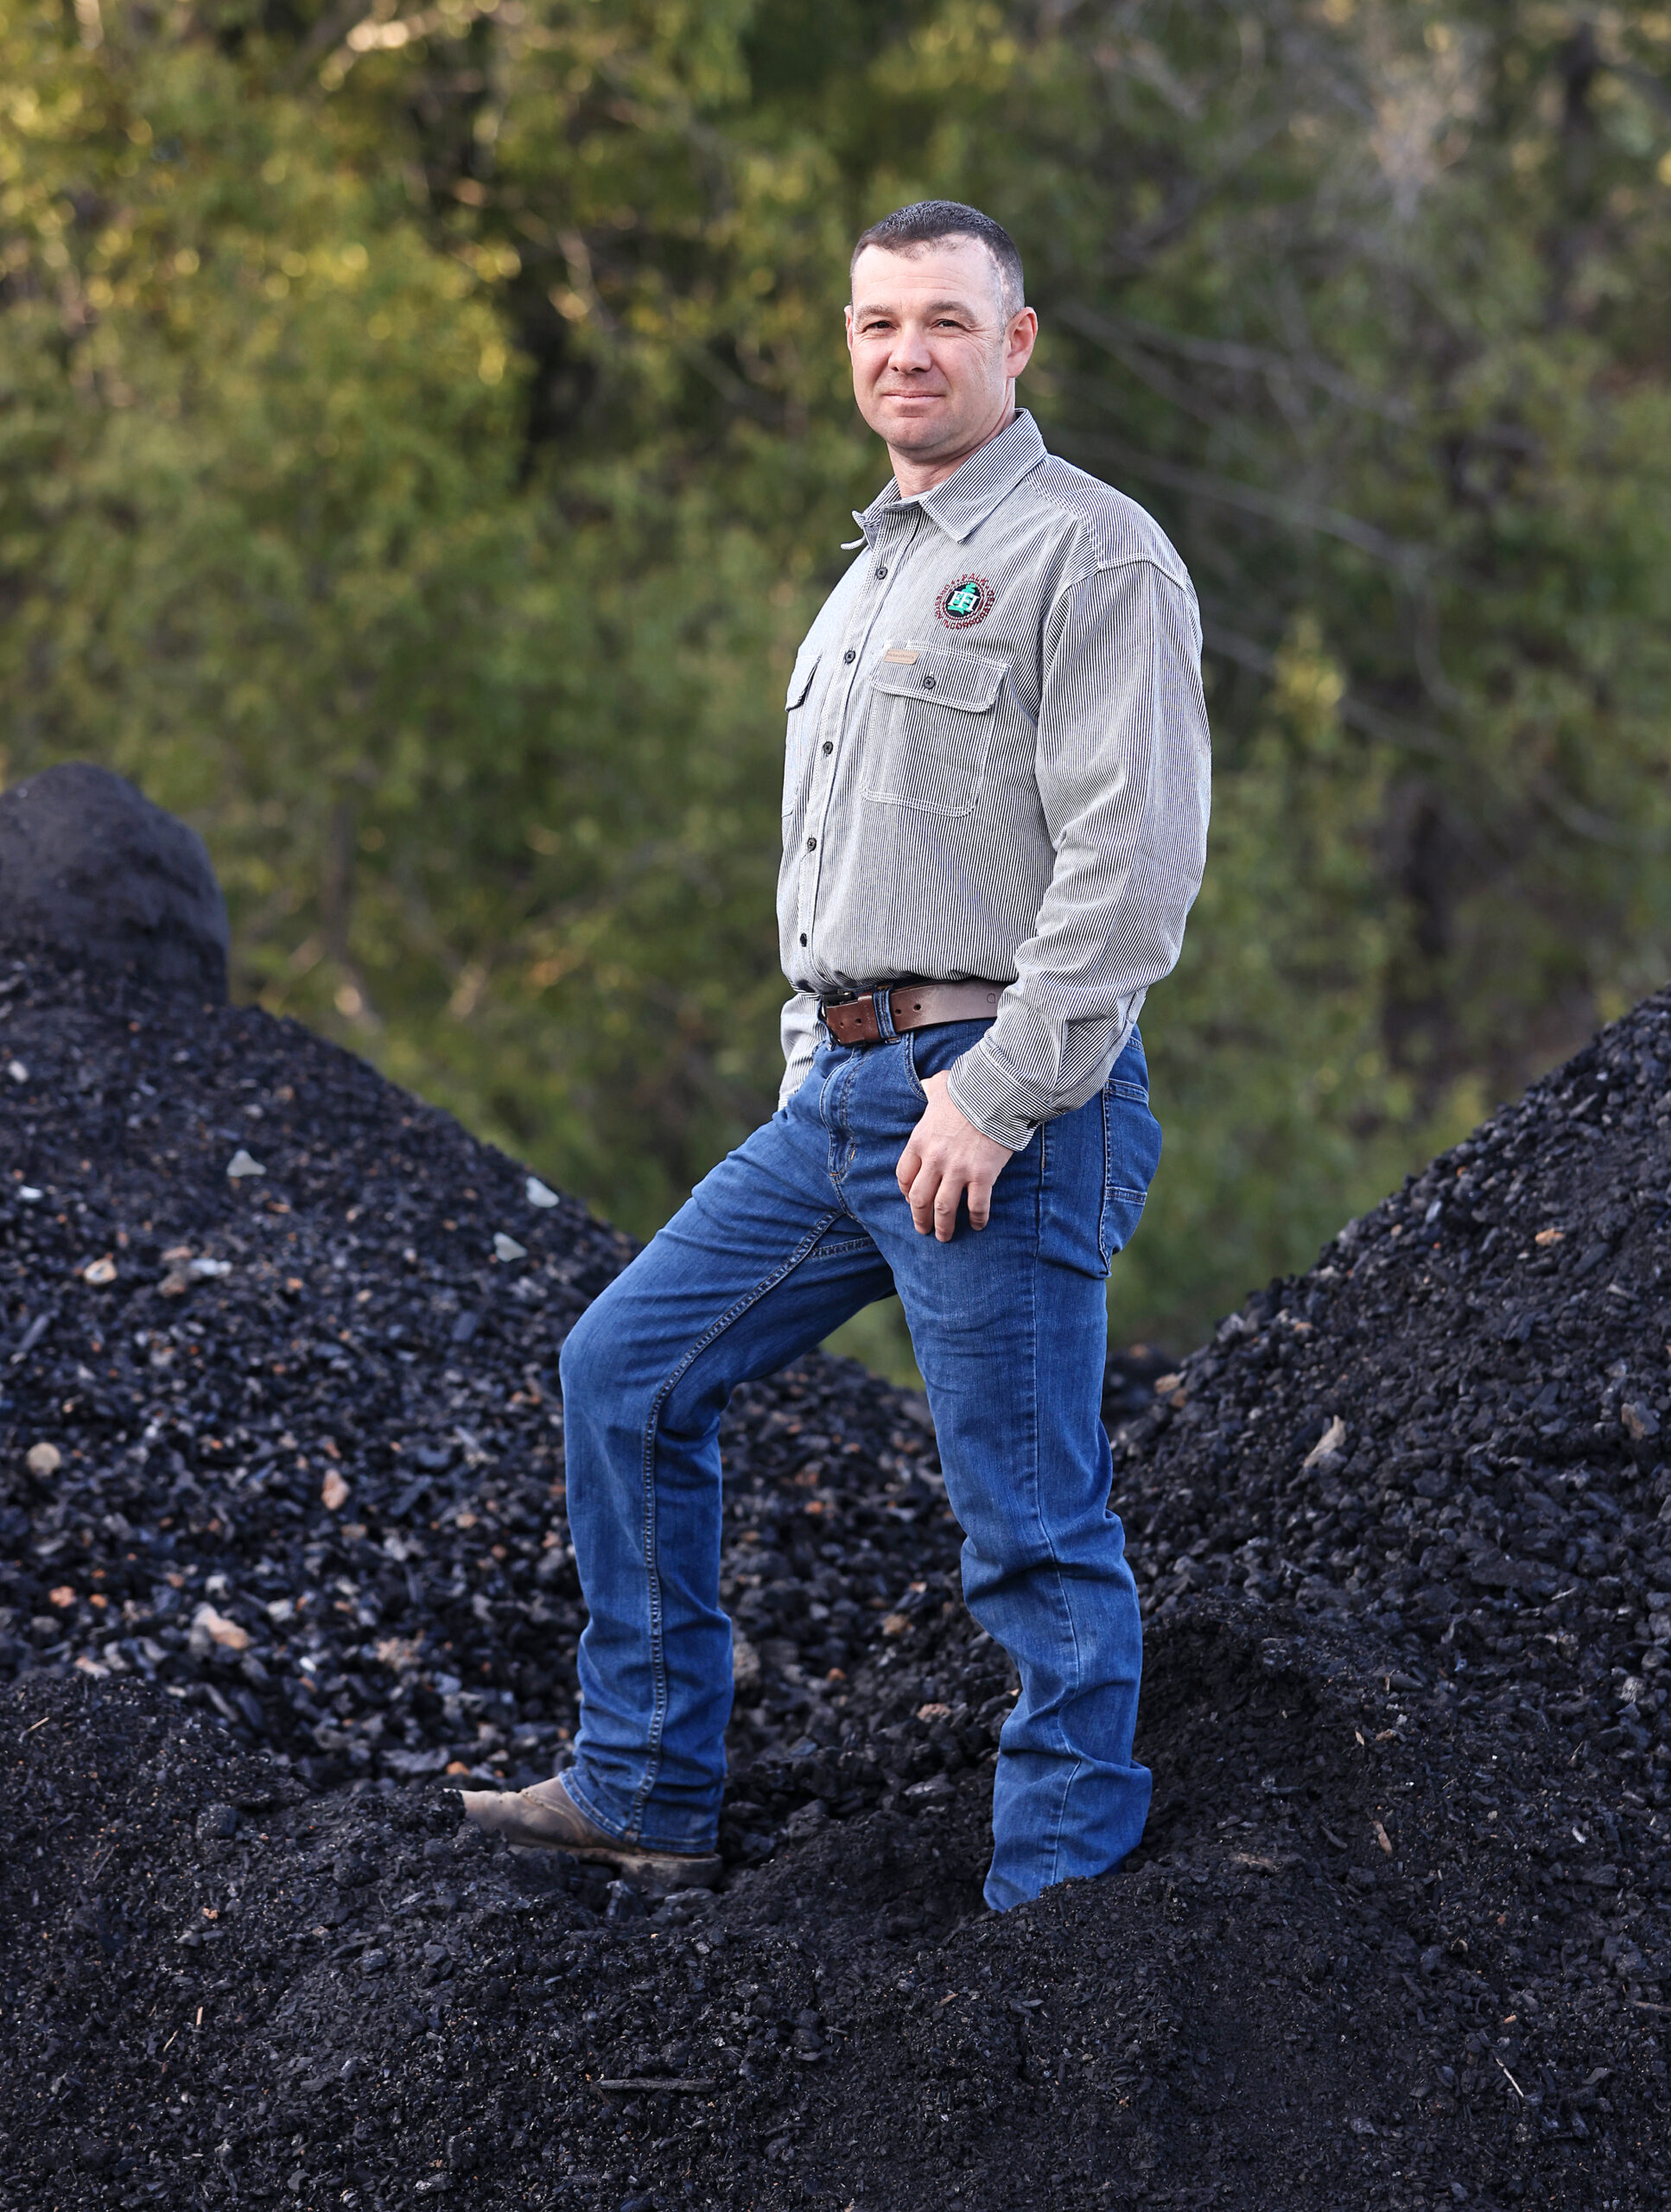 Dan Falk, fifth generation Sonoma County resident standing on a large large mound of biochar, Thursday, Jan. 13, 2022. Falk purchased a Tiger Cat Carbonizer, a machine the processes a large amount of wood and slash at the right temperature to create biochar. (Kent Porter / The Press Democrat) 2022